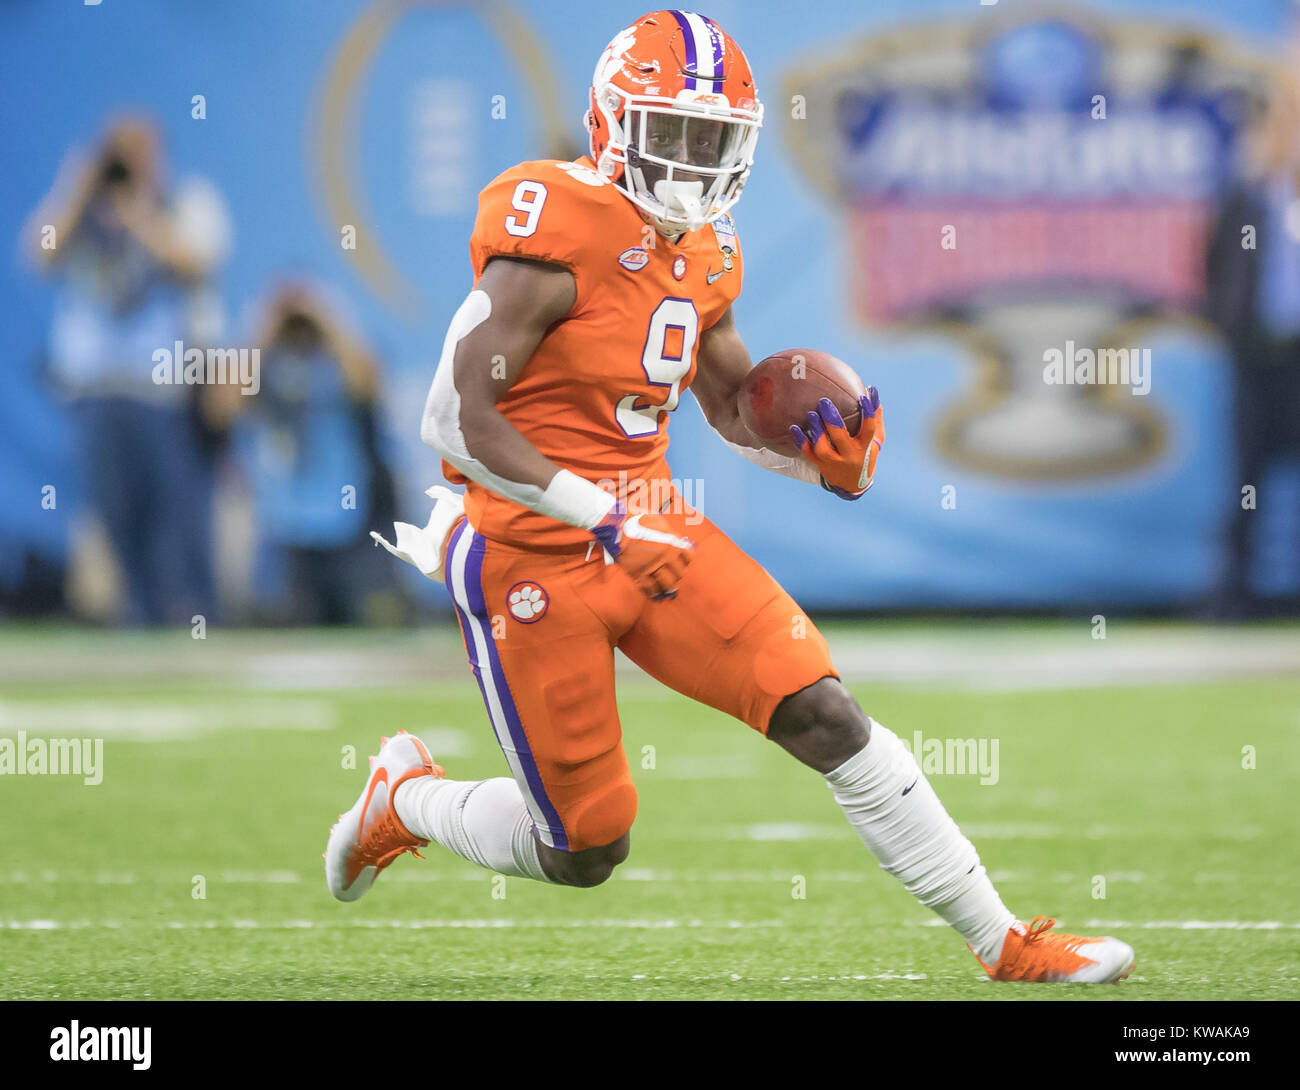 New Orleans, LA, USA. 1st Jan, 2018. Clemson RB Brian Dawkins Jr. 1st Jan, 2018. #9 runs with the ball during the Allstate Sugar Bowl football game between the Clemson Tigers and the Alabama Crimson Tide at the Mercedes-Benz Supedome in New Orleans, LA. Kyle Okita/CSM/Alamy Live News Stock Photo